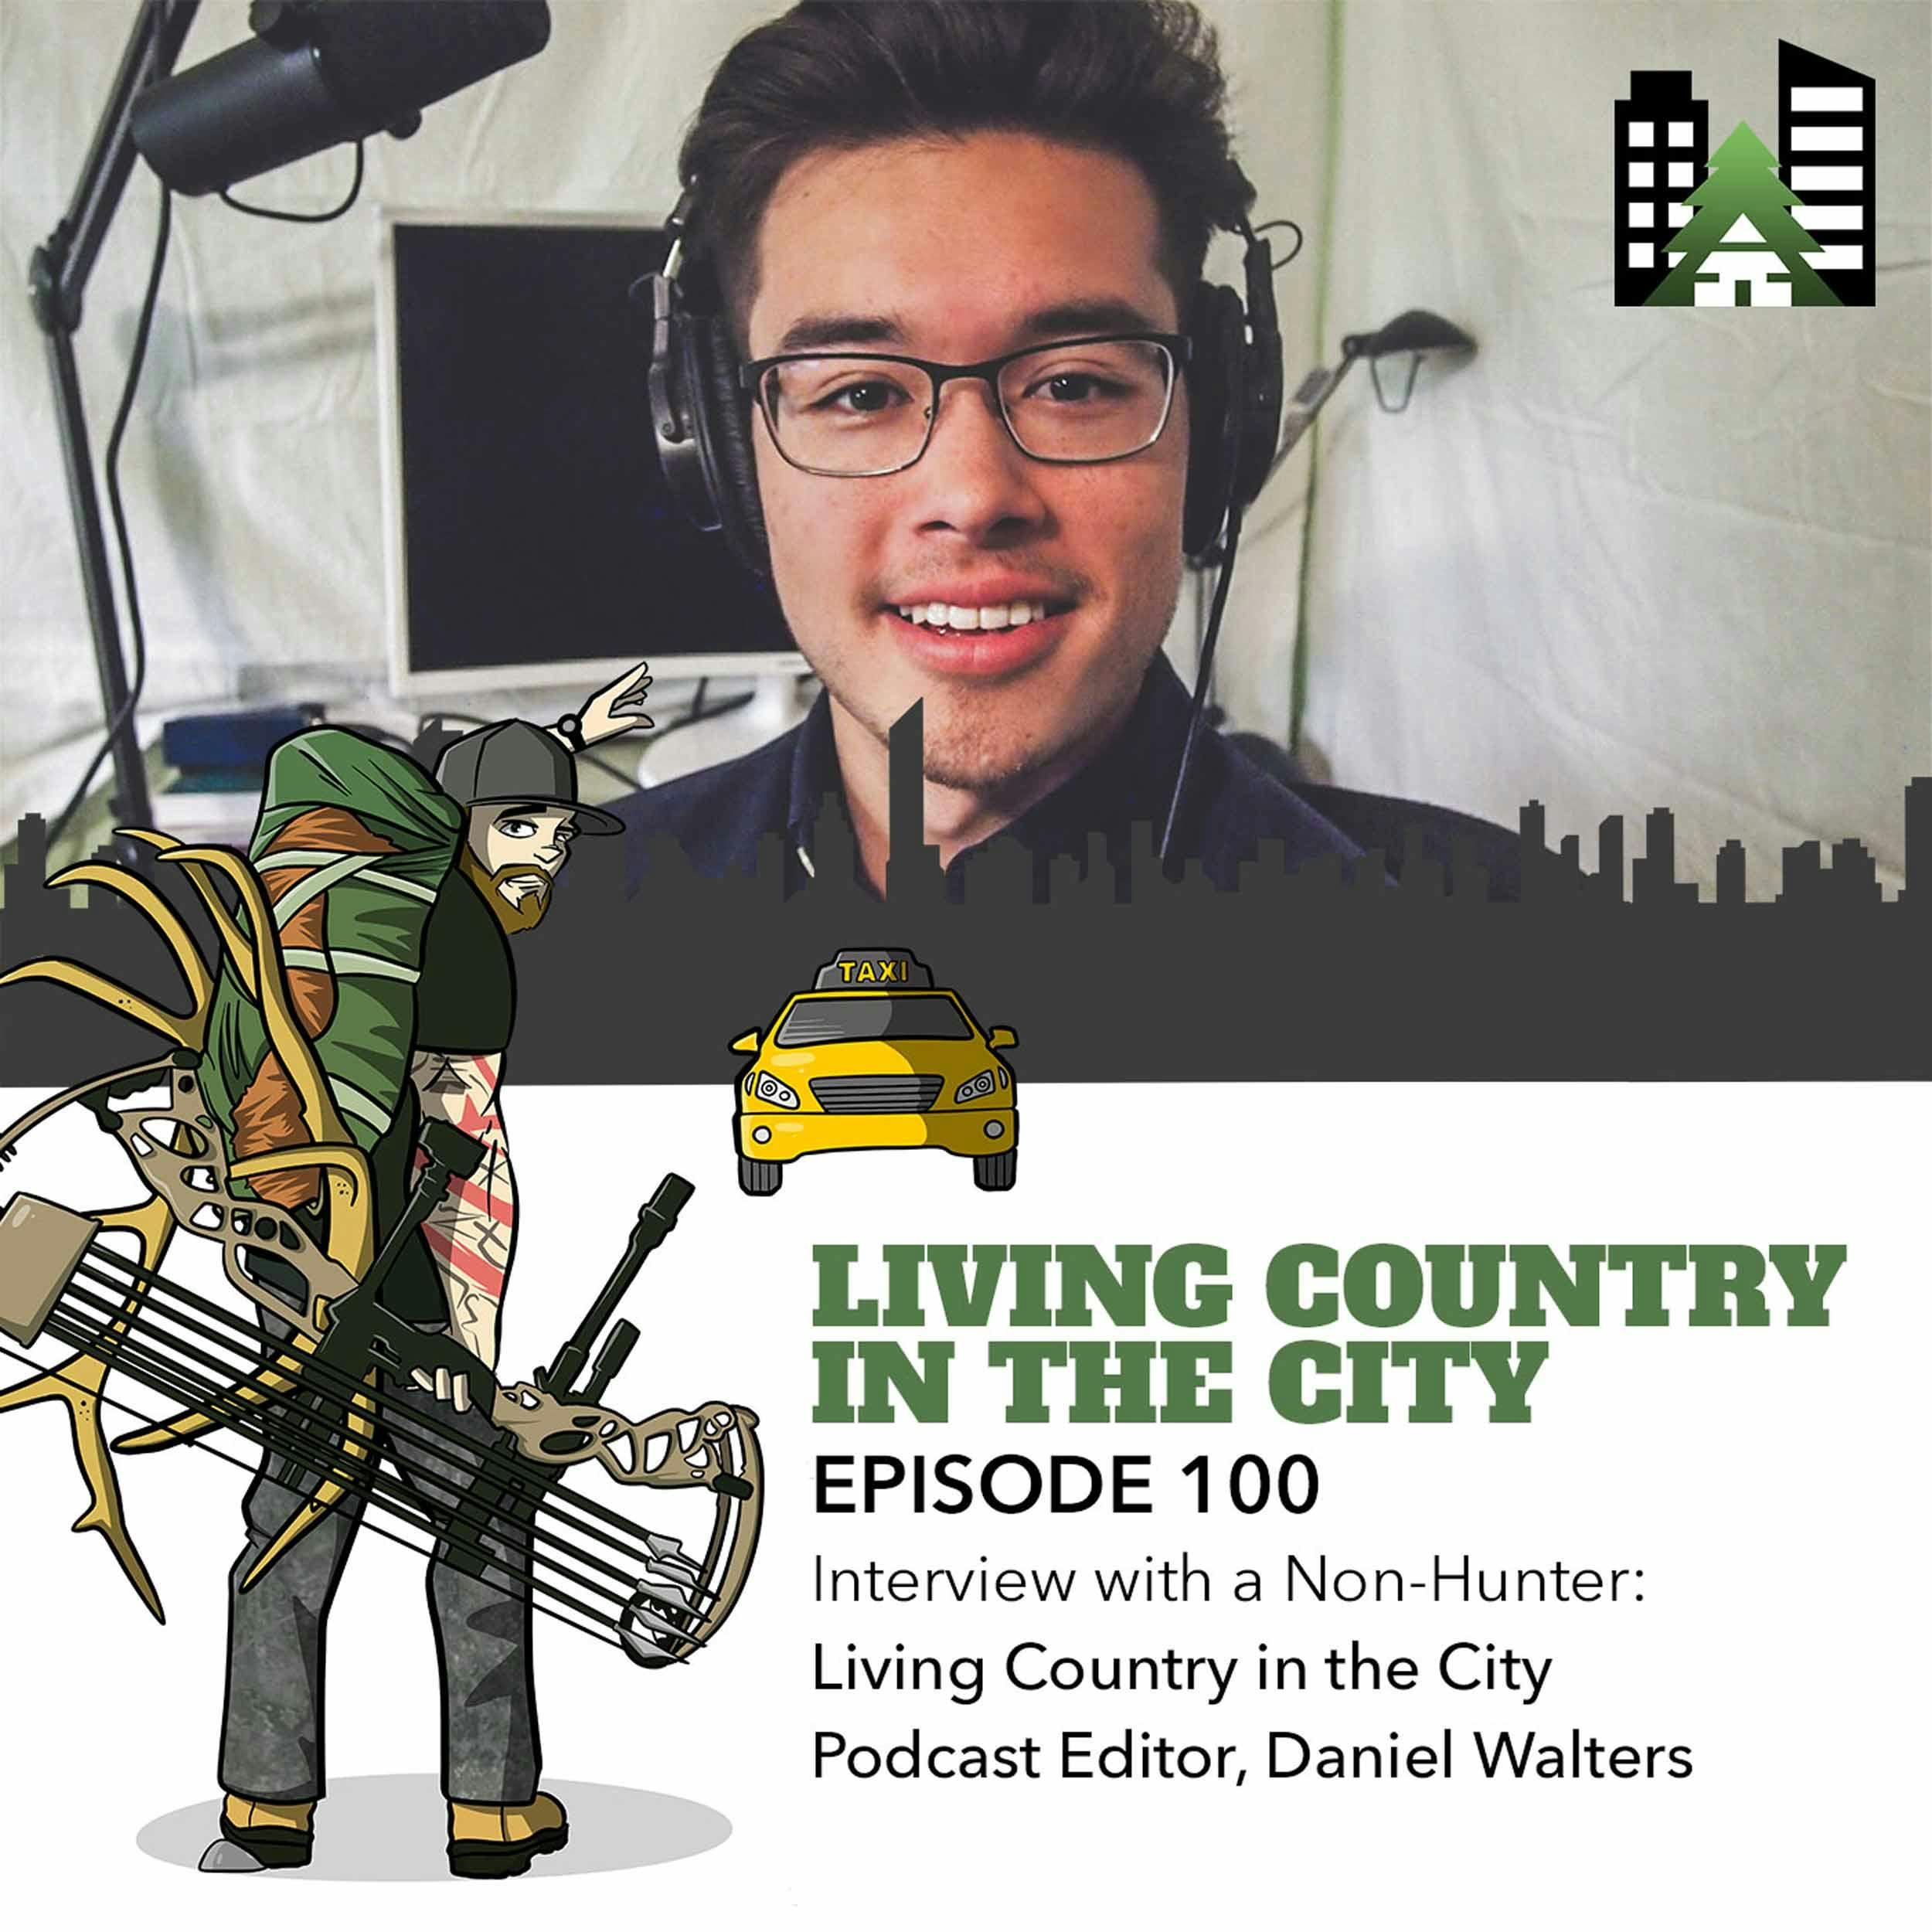 Ep 100 - Interview with a Non-Hunter: Living Country in the City Podcast Editor, Daniel Walters